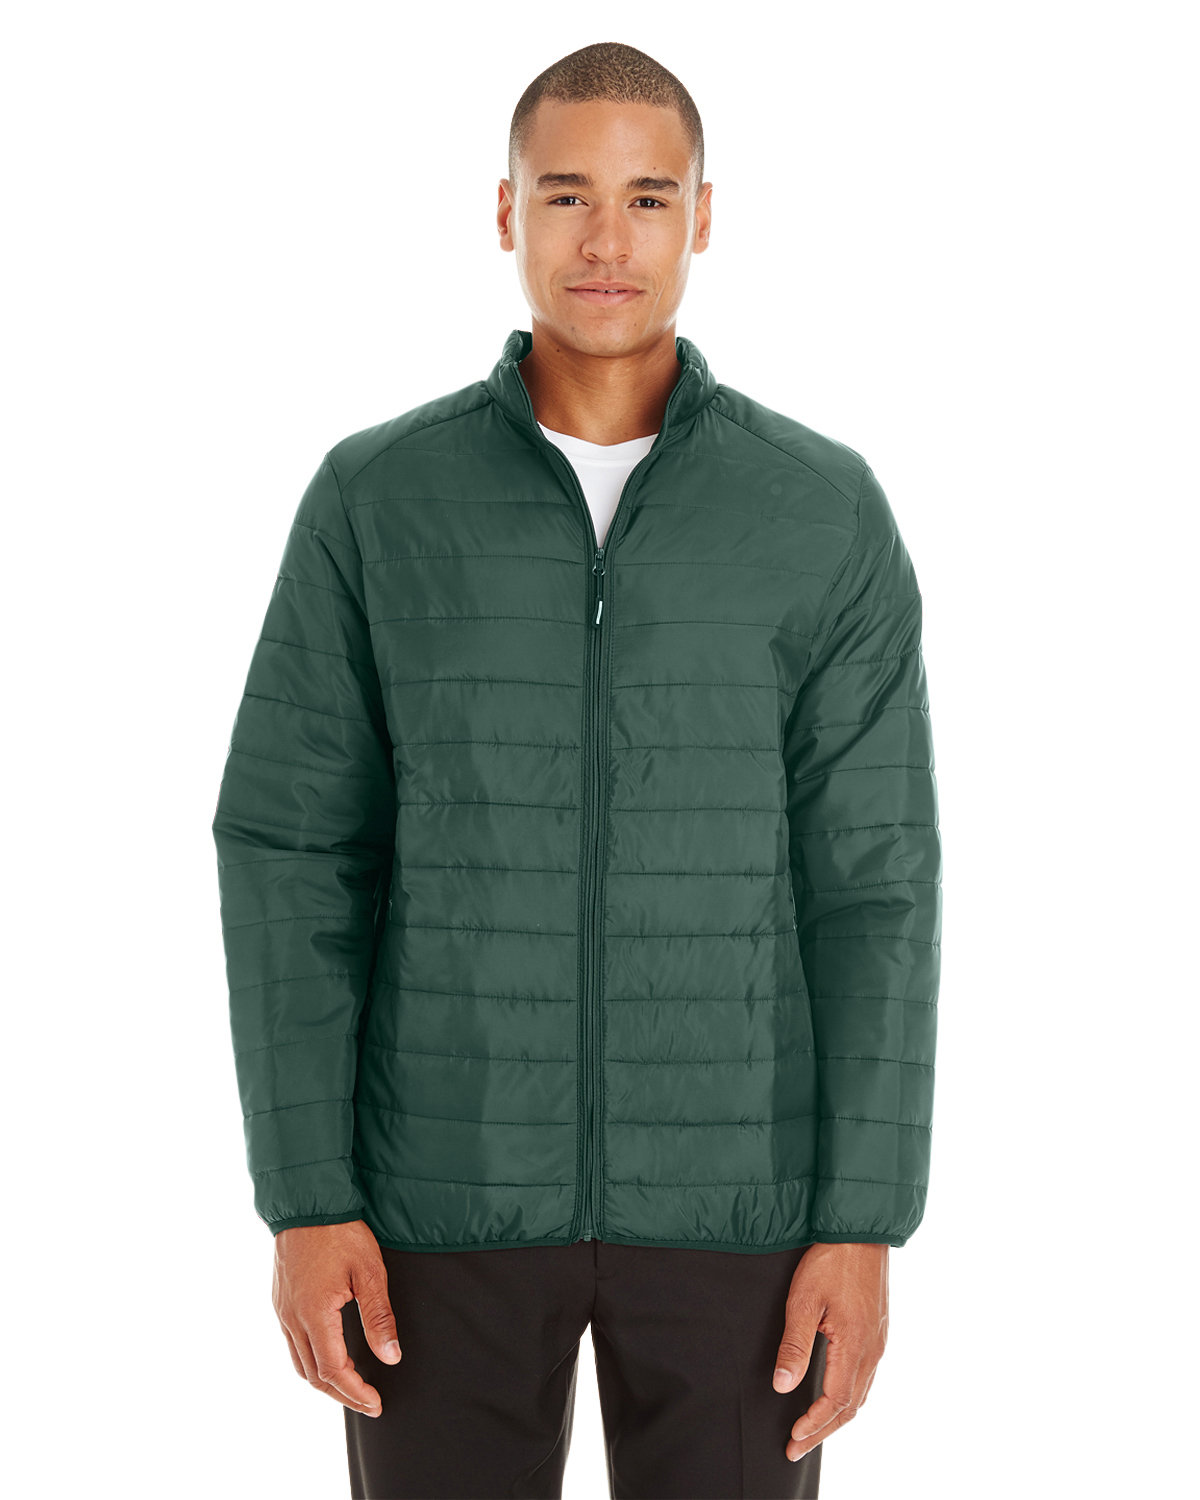 Core 365 Men's Prevail Packable Puffer Jacket FOREST 